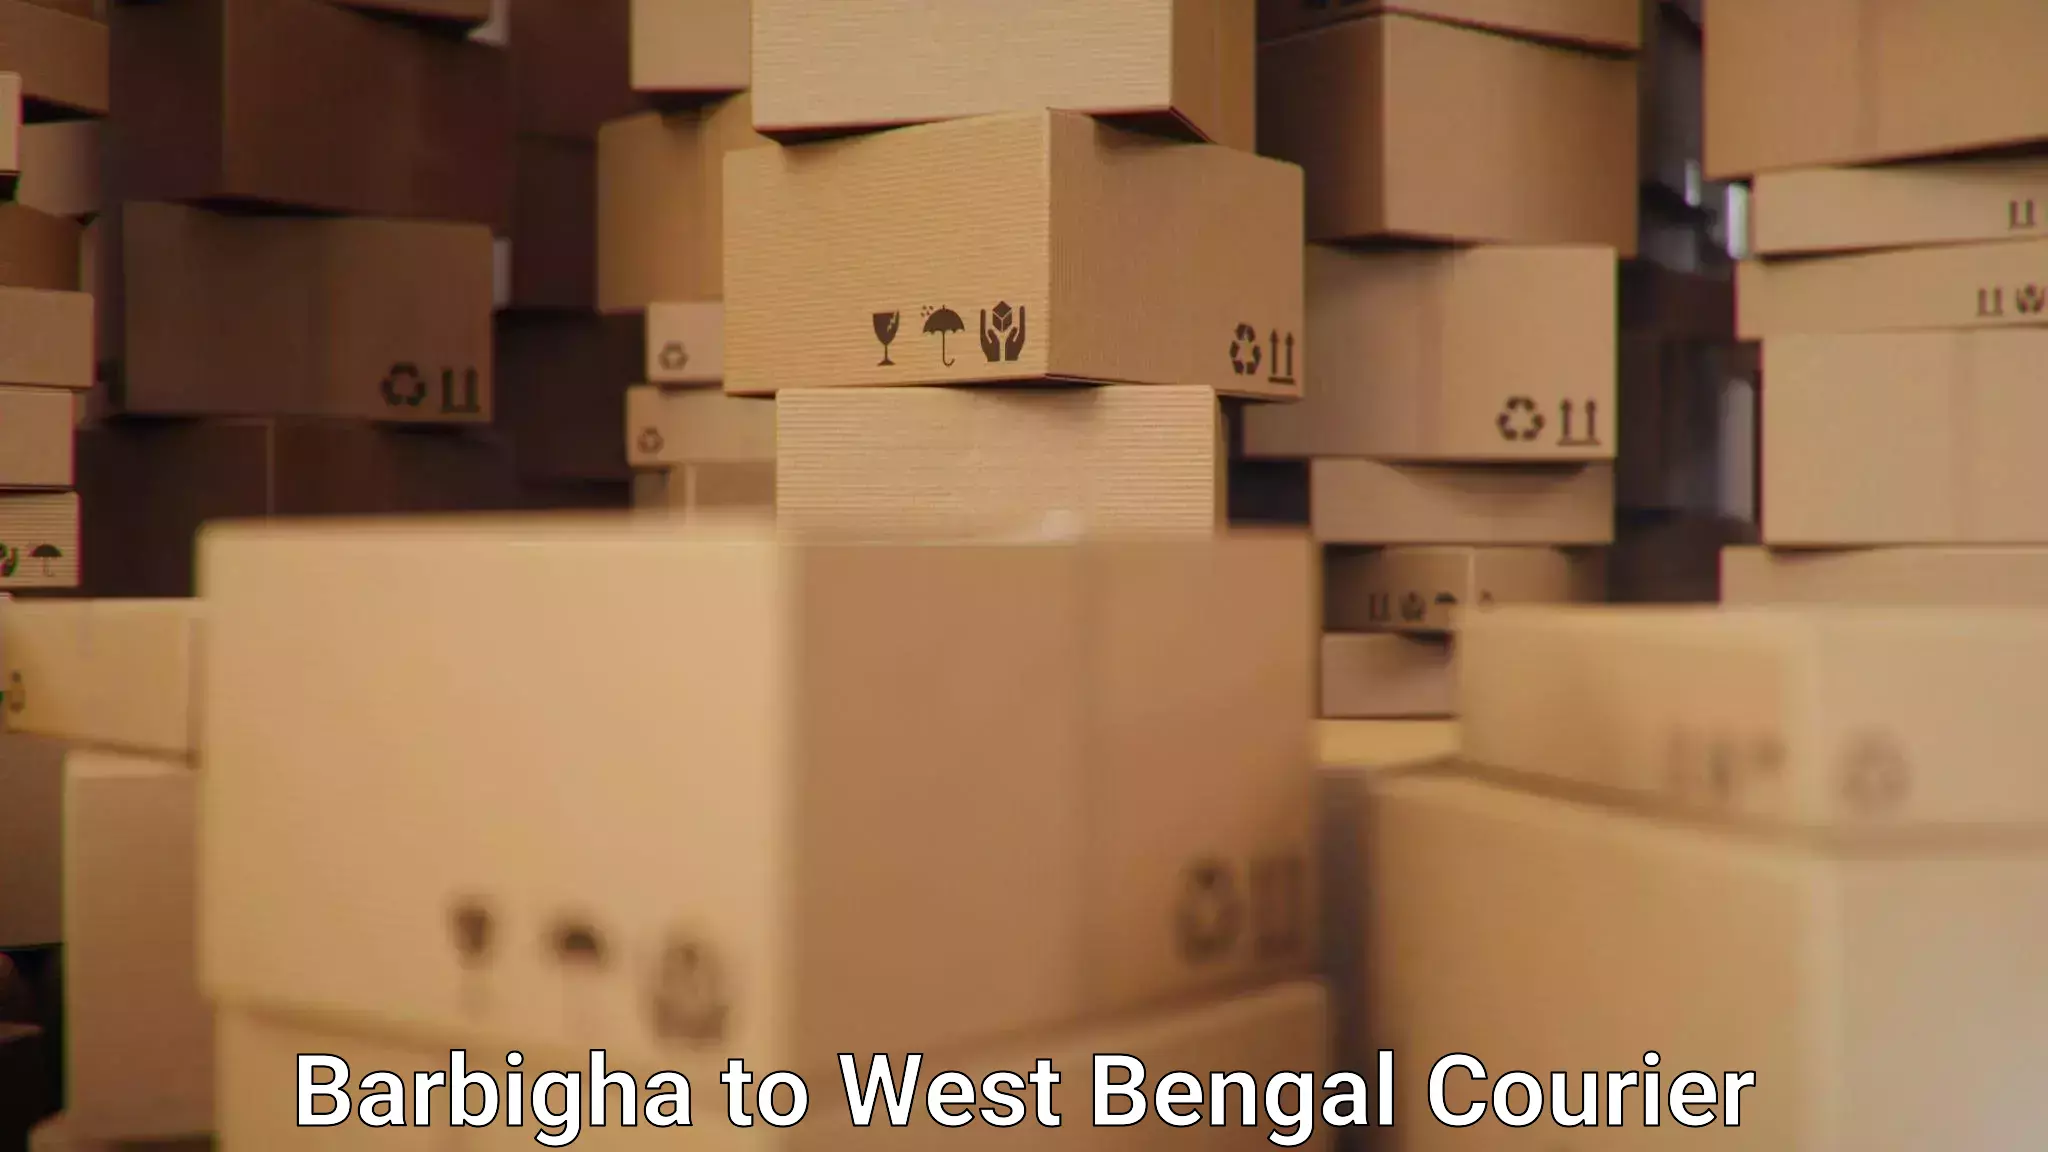 Global shipping networks Barbigha to West Bengal